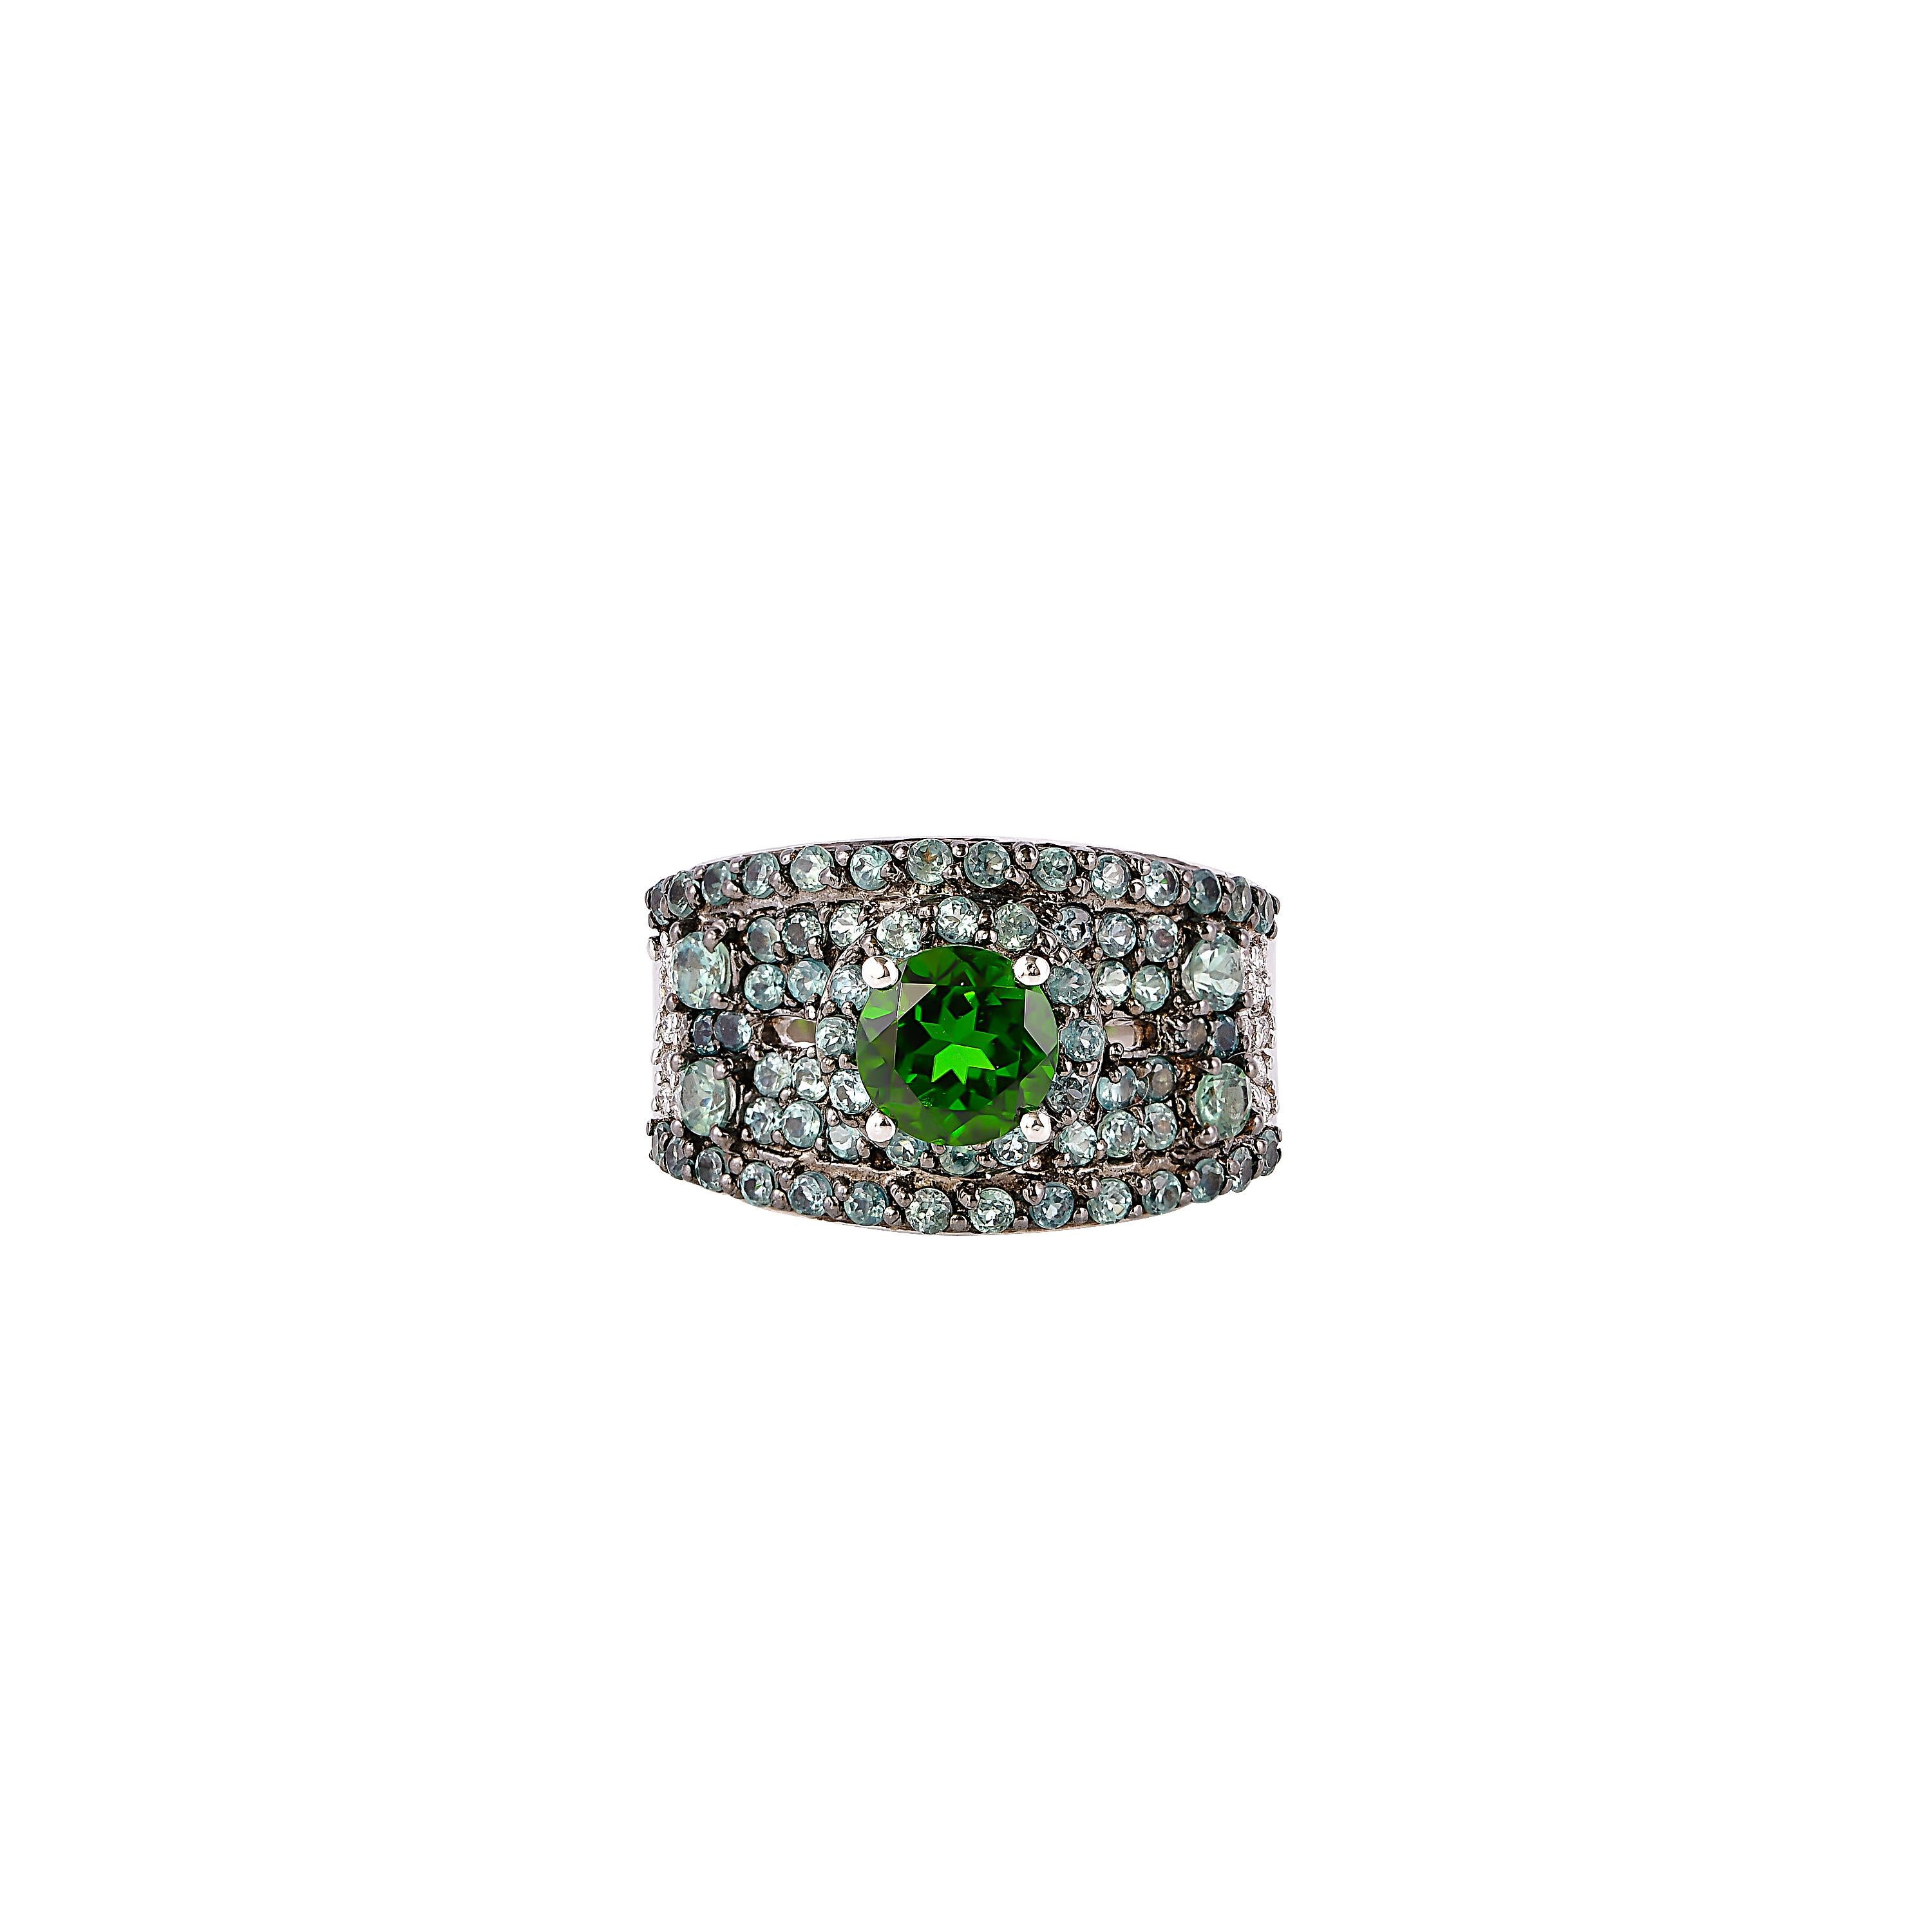 Round Cut 1.10 Carat Chrome Diopside Ring in 14 Karat White Gold For Sale